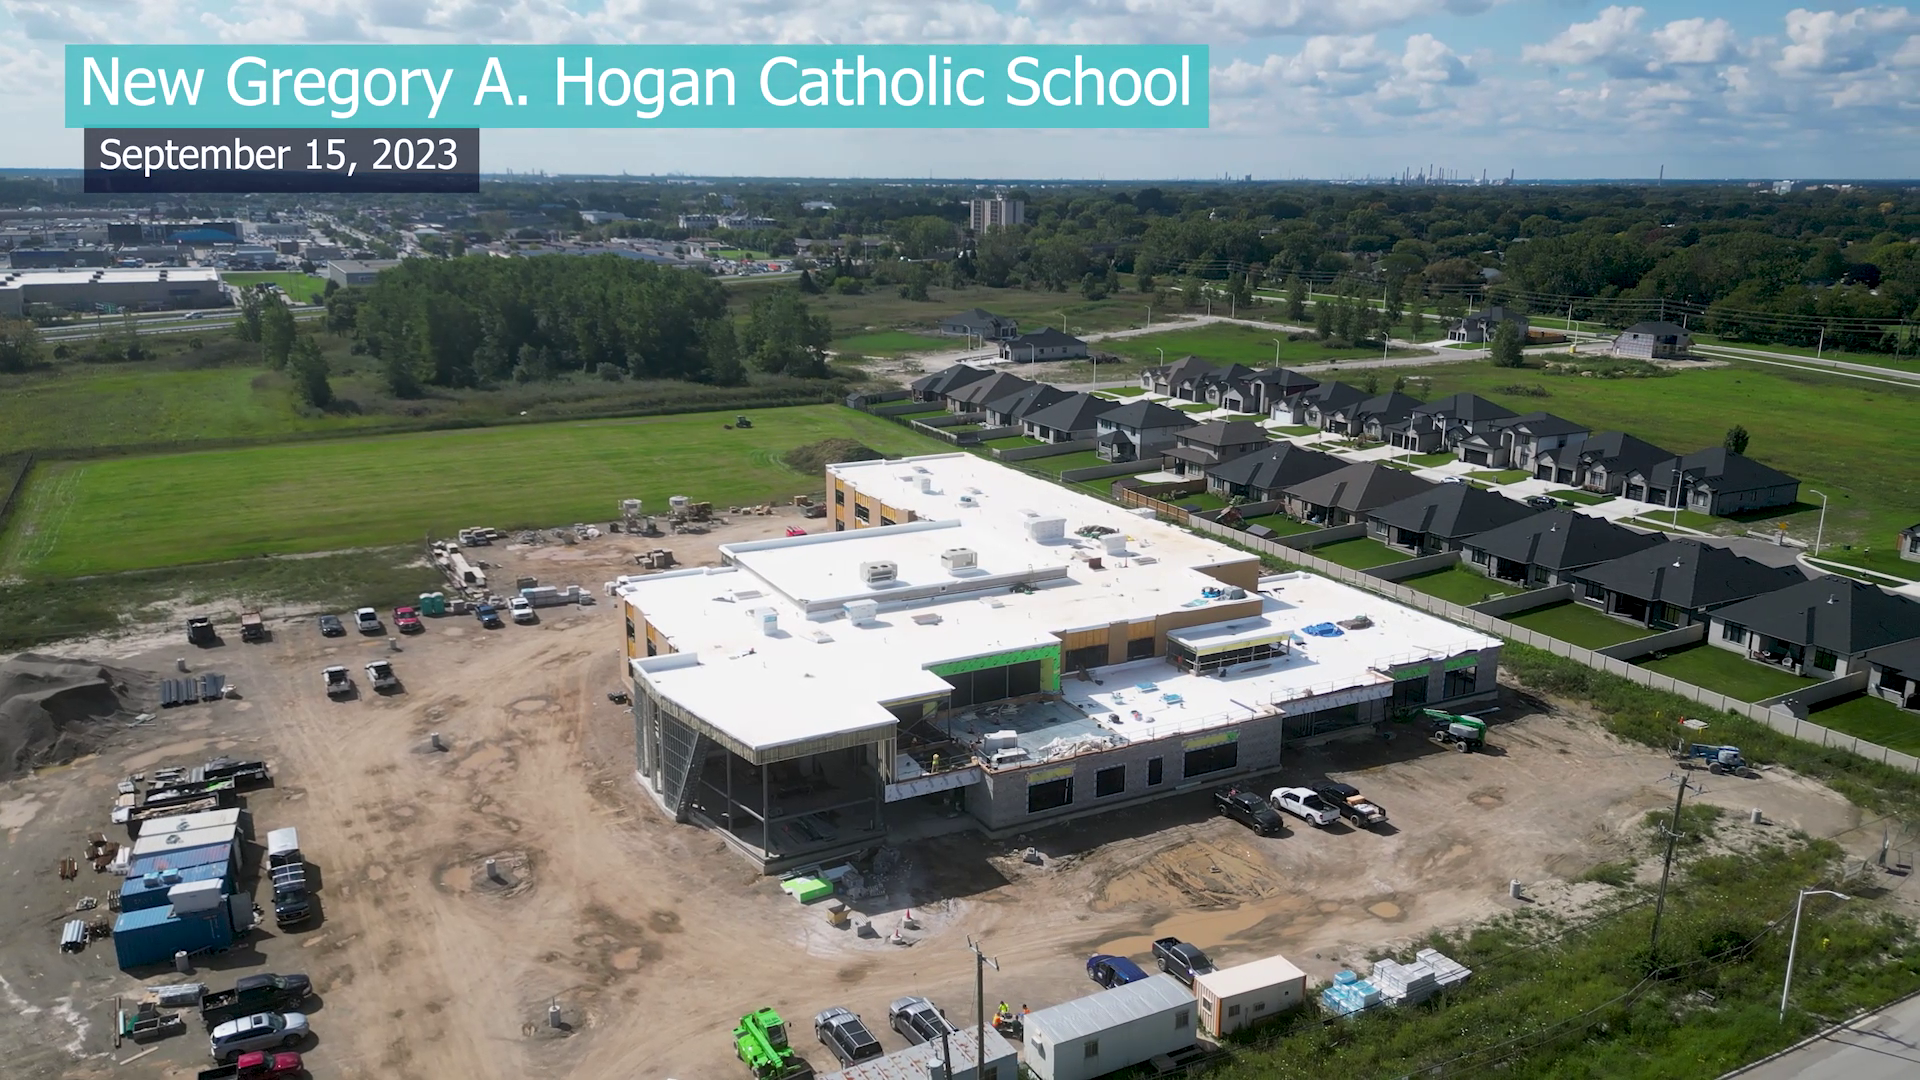 Board of Trustees Updated on Construction Timelines for New Gregory A. Hogan Catholic School